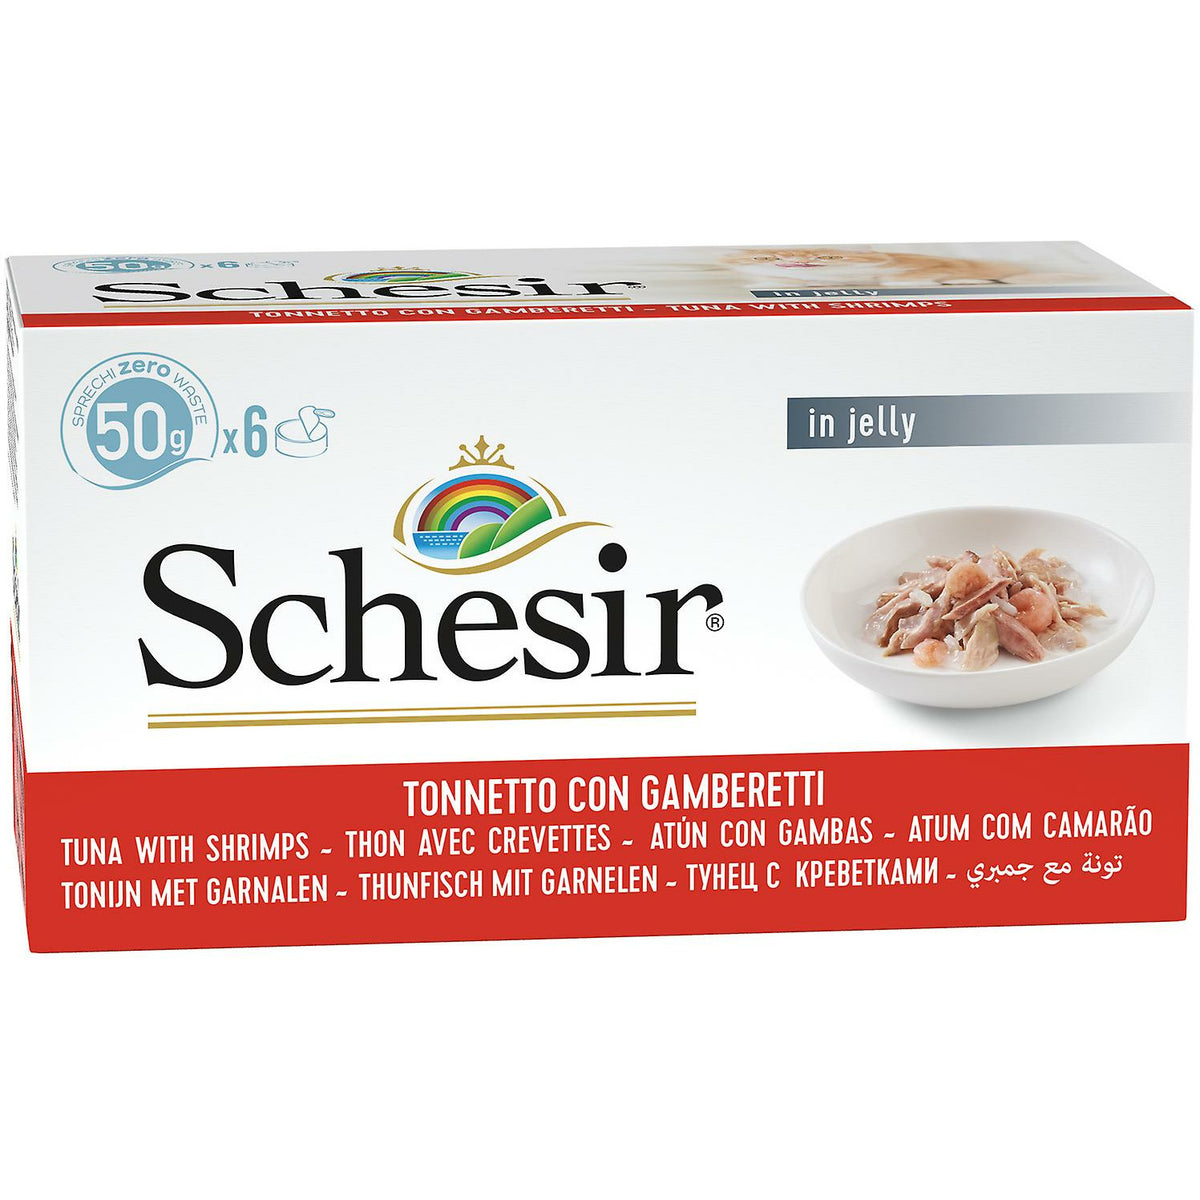 Schesir Tuna with Shrimp - 6 Pack of Wet Canned Cat Food (6 x 50g)